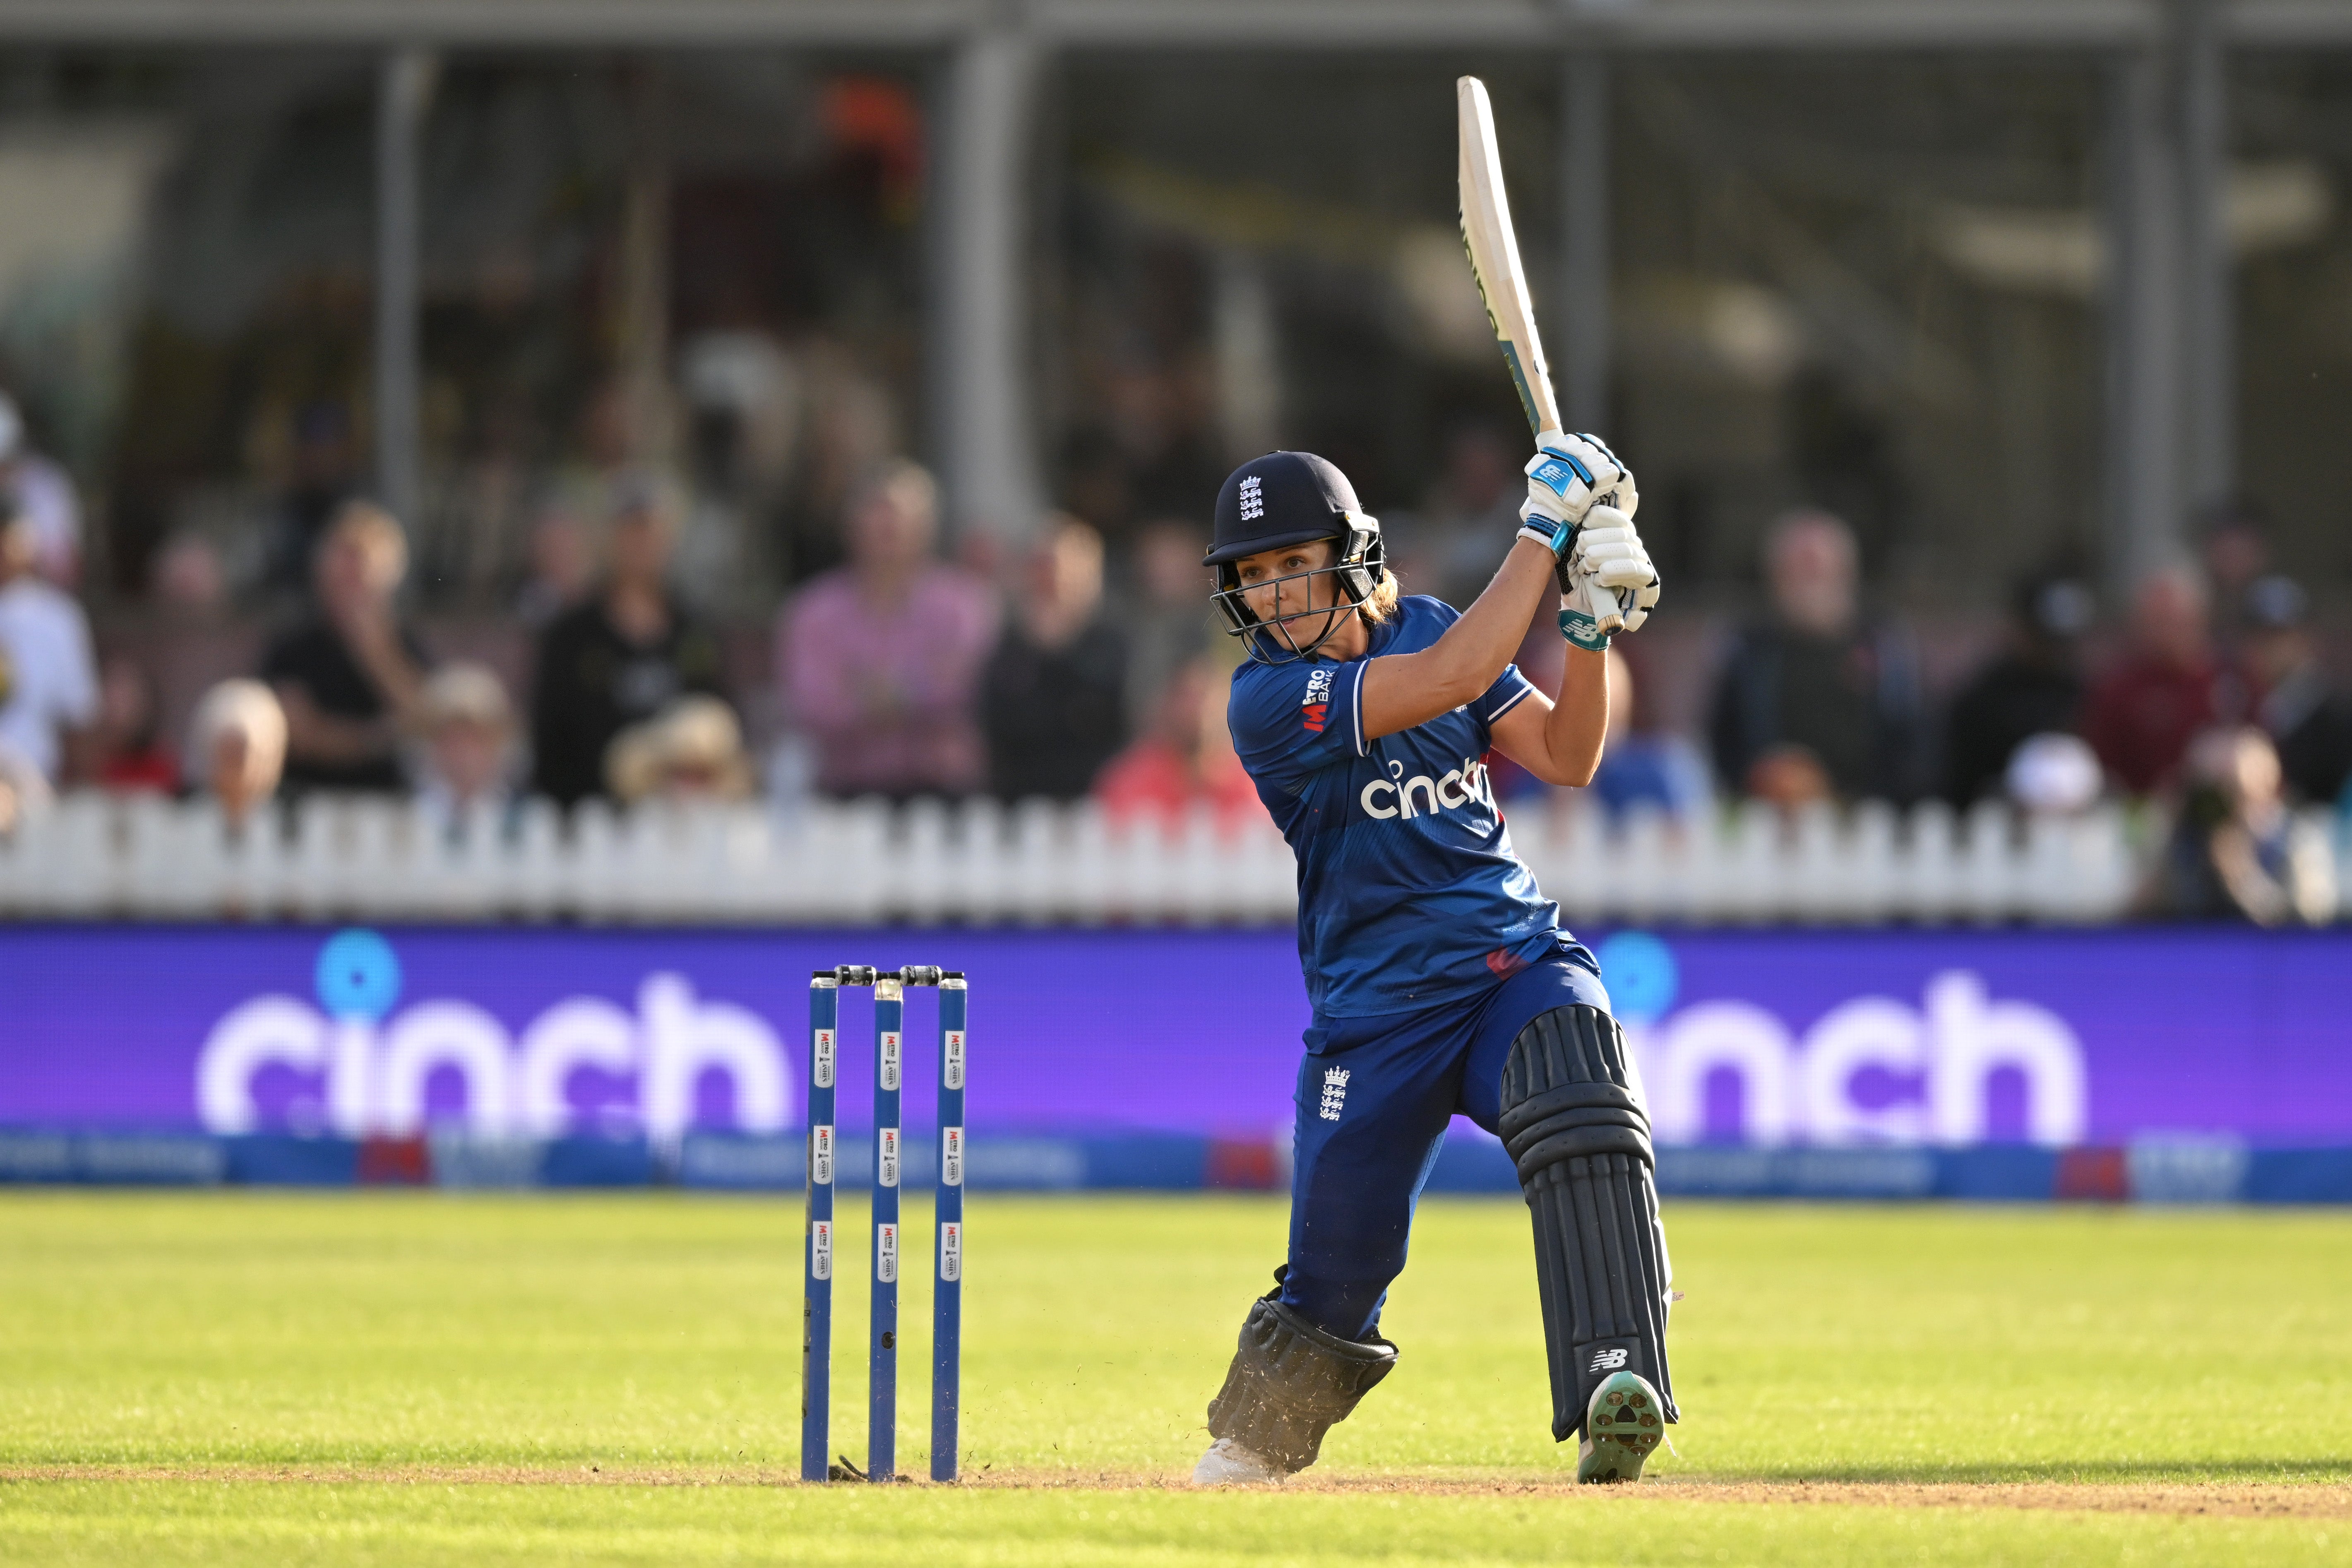 Kate Cross hit 19 runs as England chased down their highest ever total in one day internationals